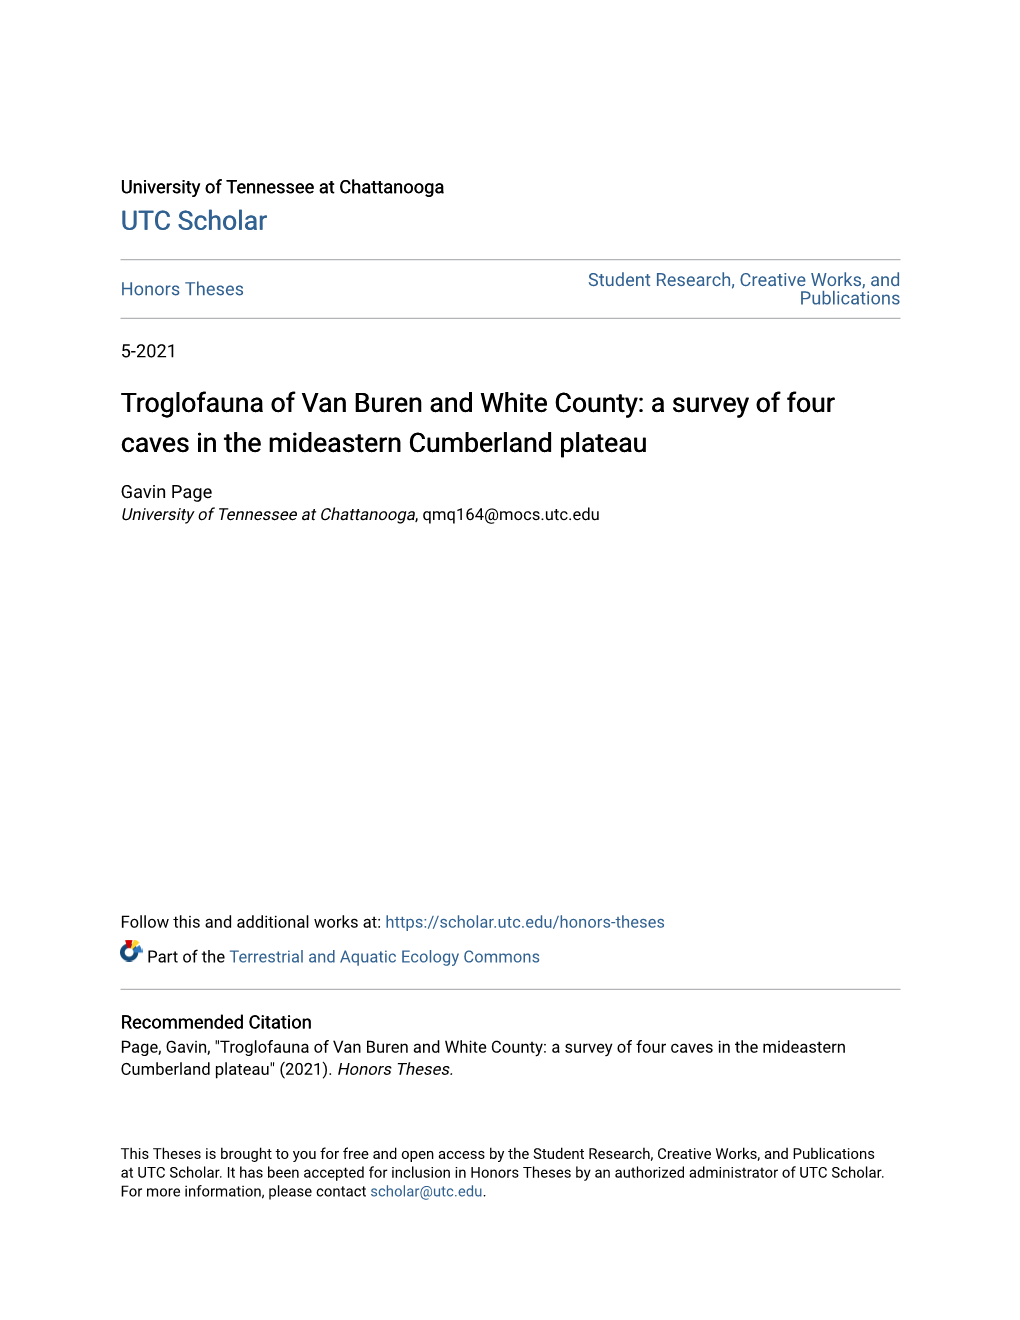 Troglofauna of Van Buren and White County: a Survey of Four Caves in the Mideastern Cumberland Plateau